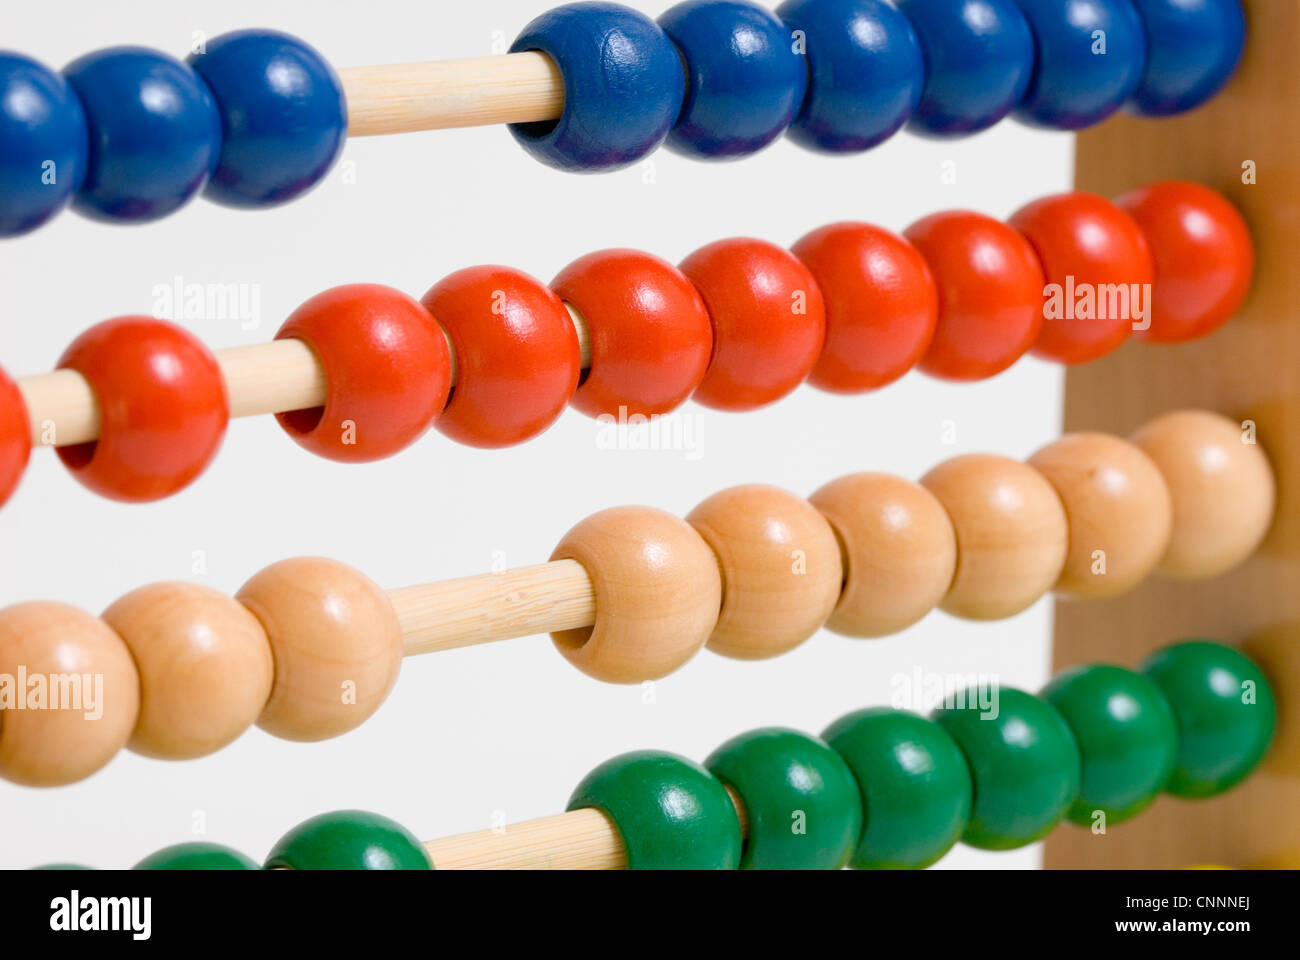 Abacus educational toy for Kids. Stock Photo